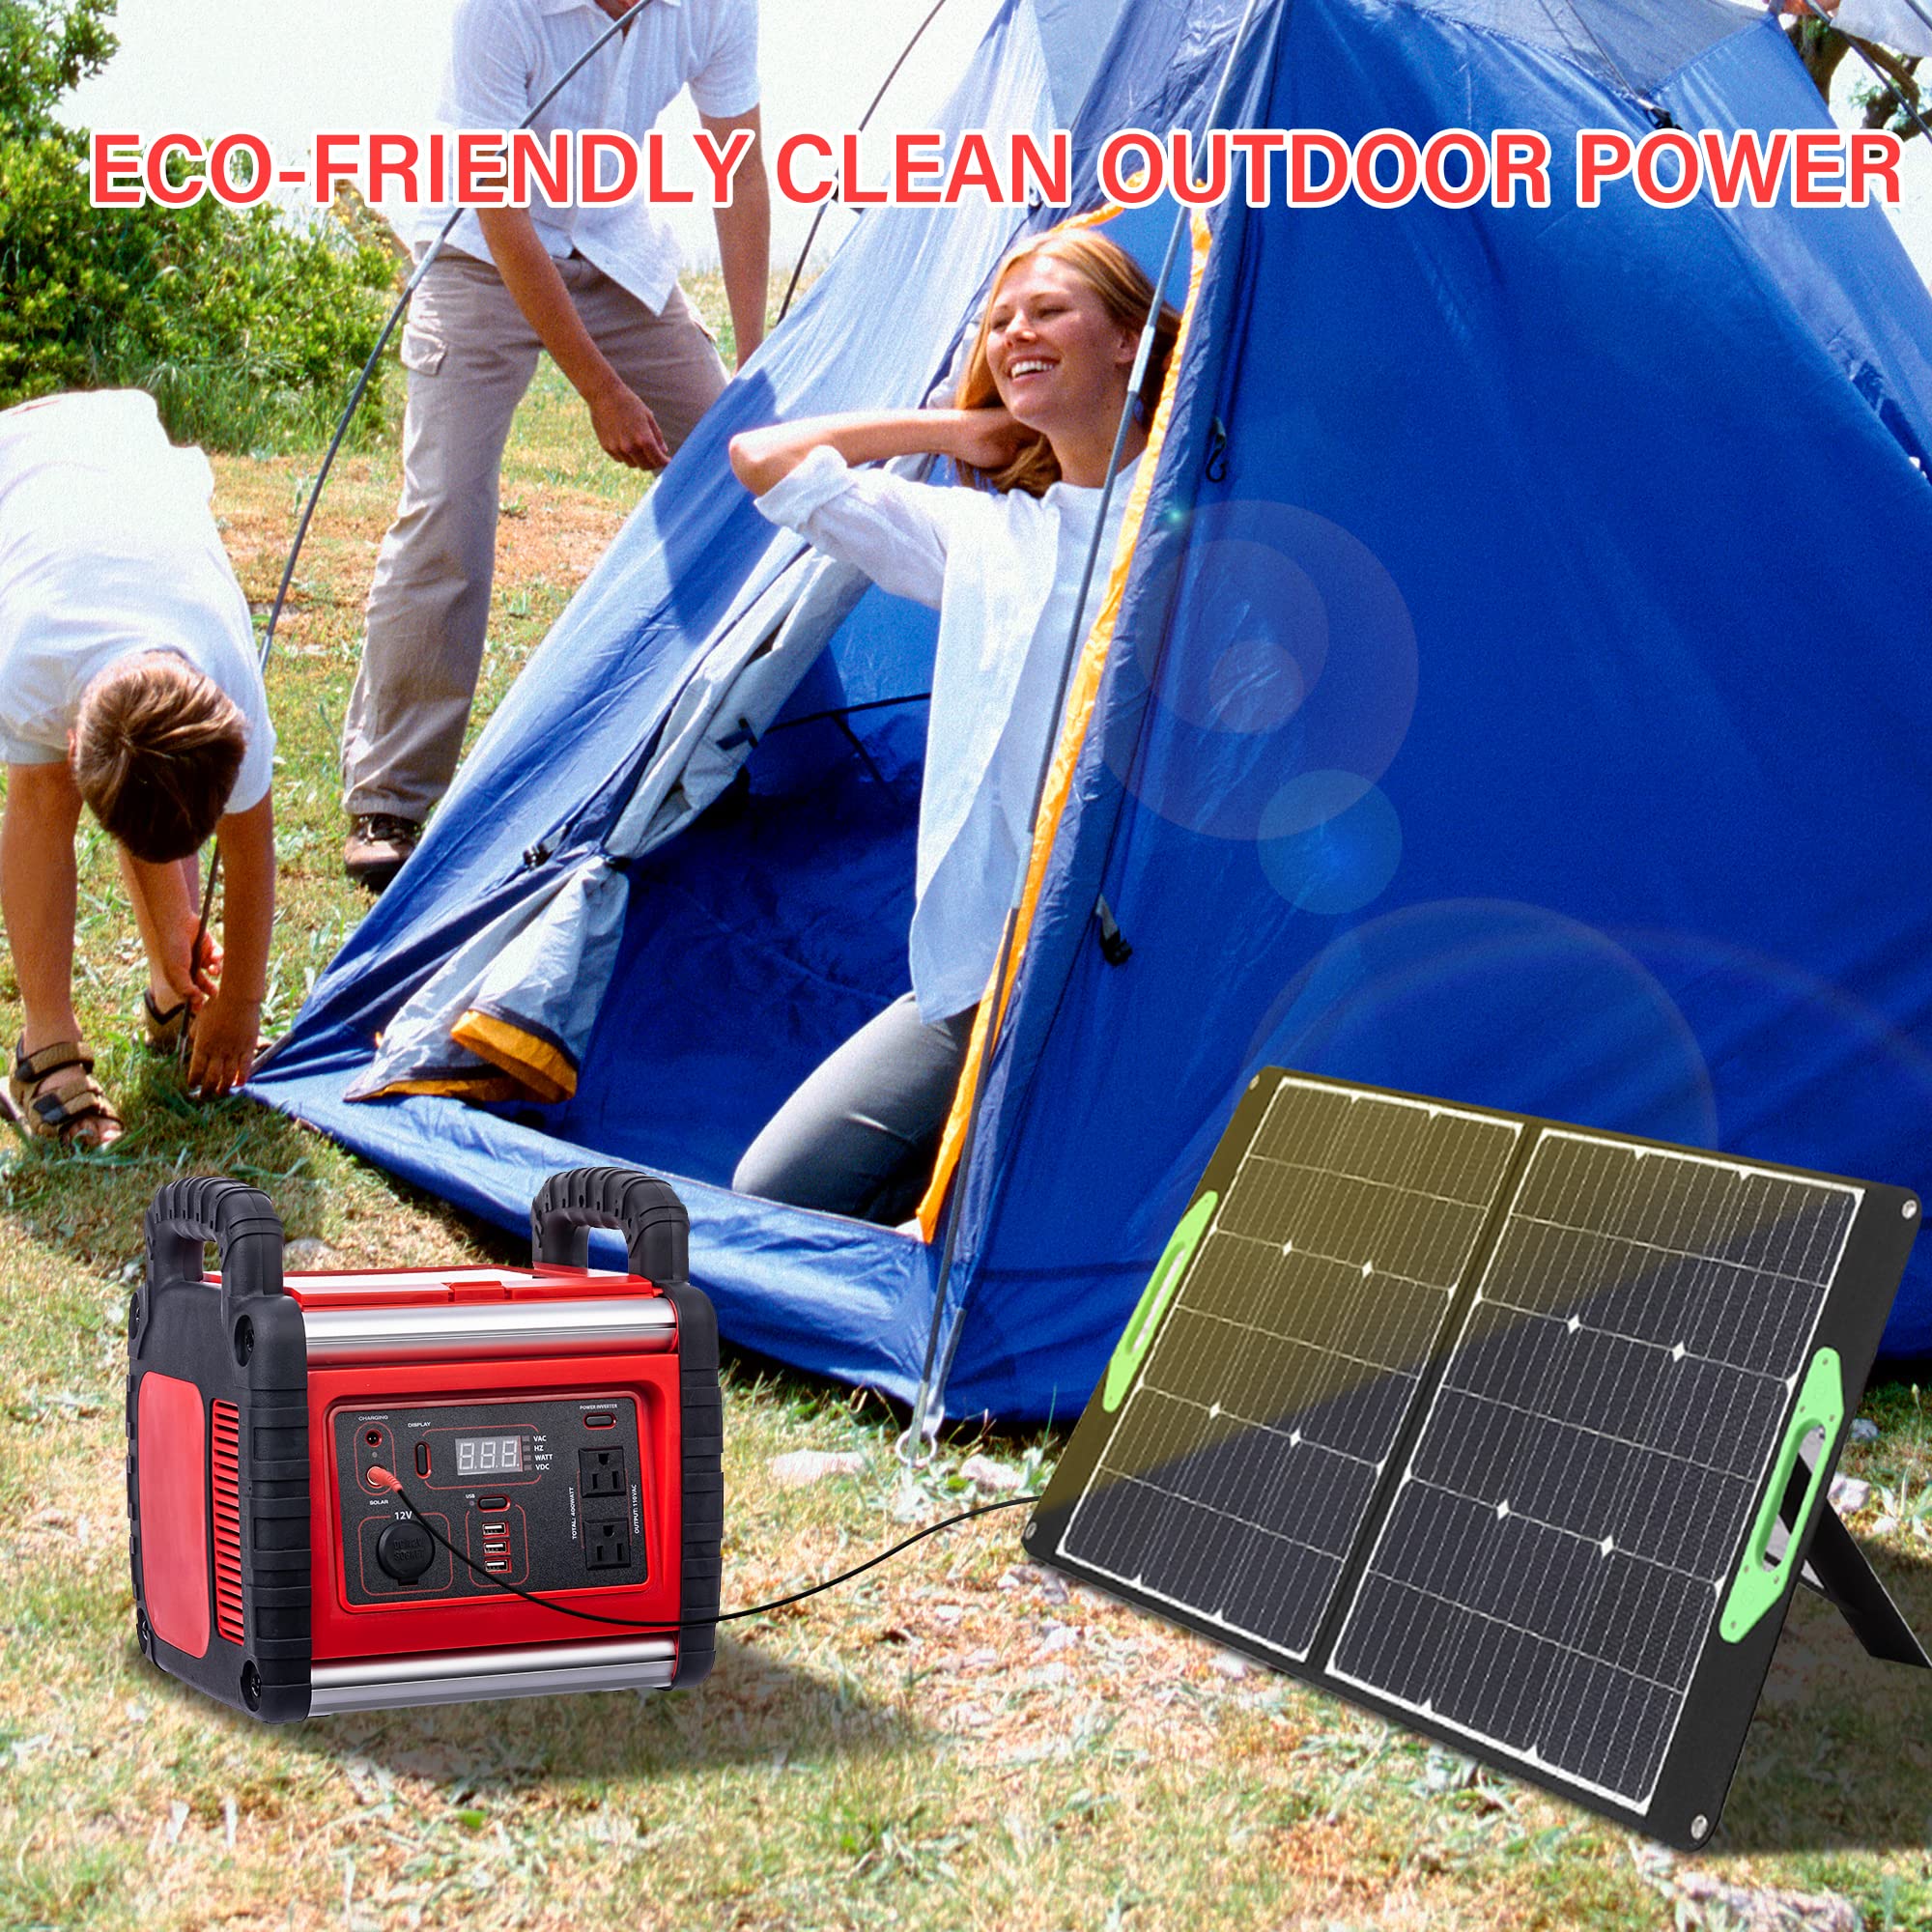 Tyrell Chenergy 400W Portable Power Station,800W Inverter Peak Surge,Solar Generator with 2 110V AC Outlet/3 USB Ports/1 DC Ports, Backup Power for Emergency Outdoor Camping Fishing Hunting